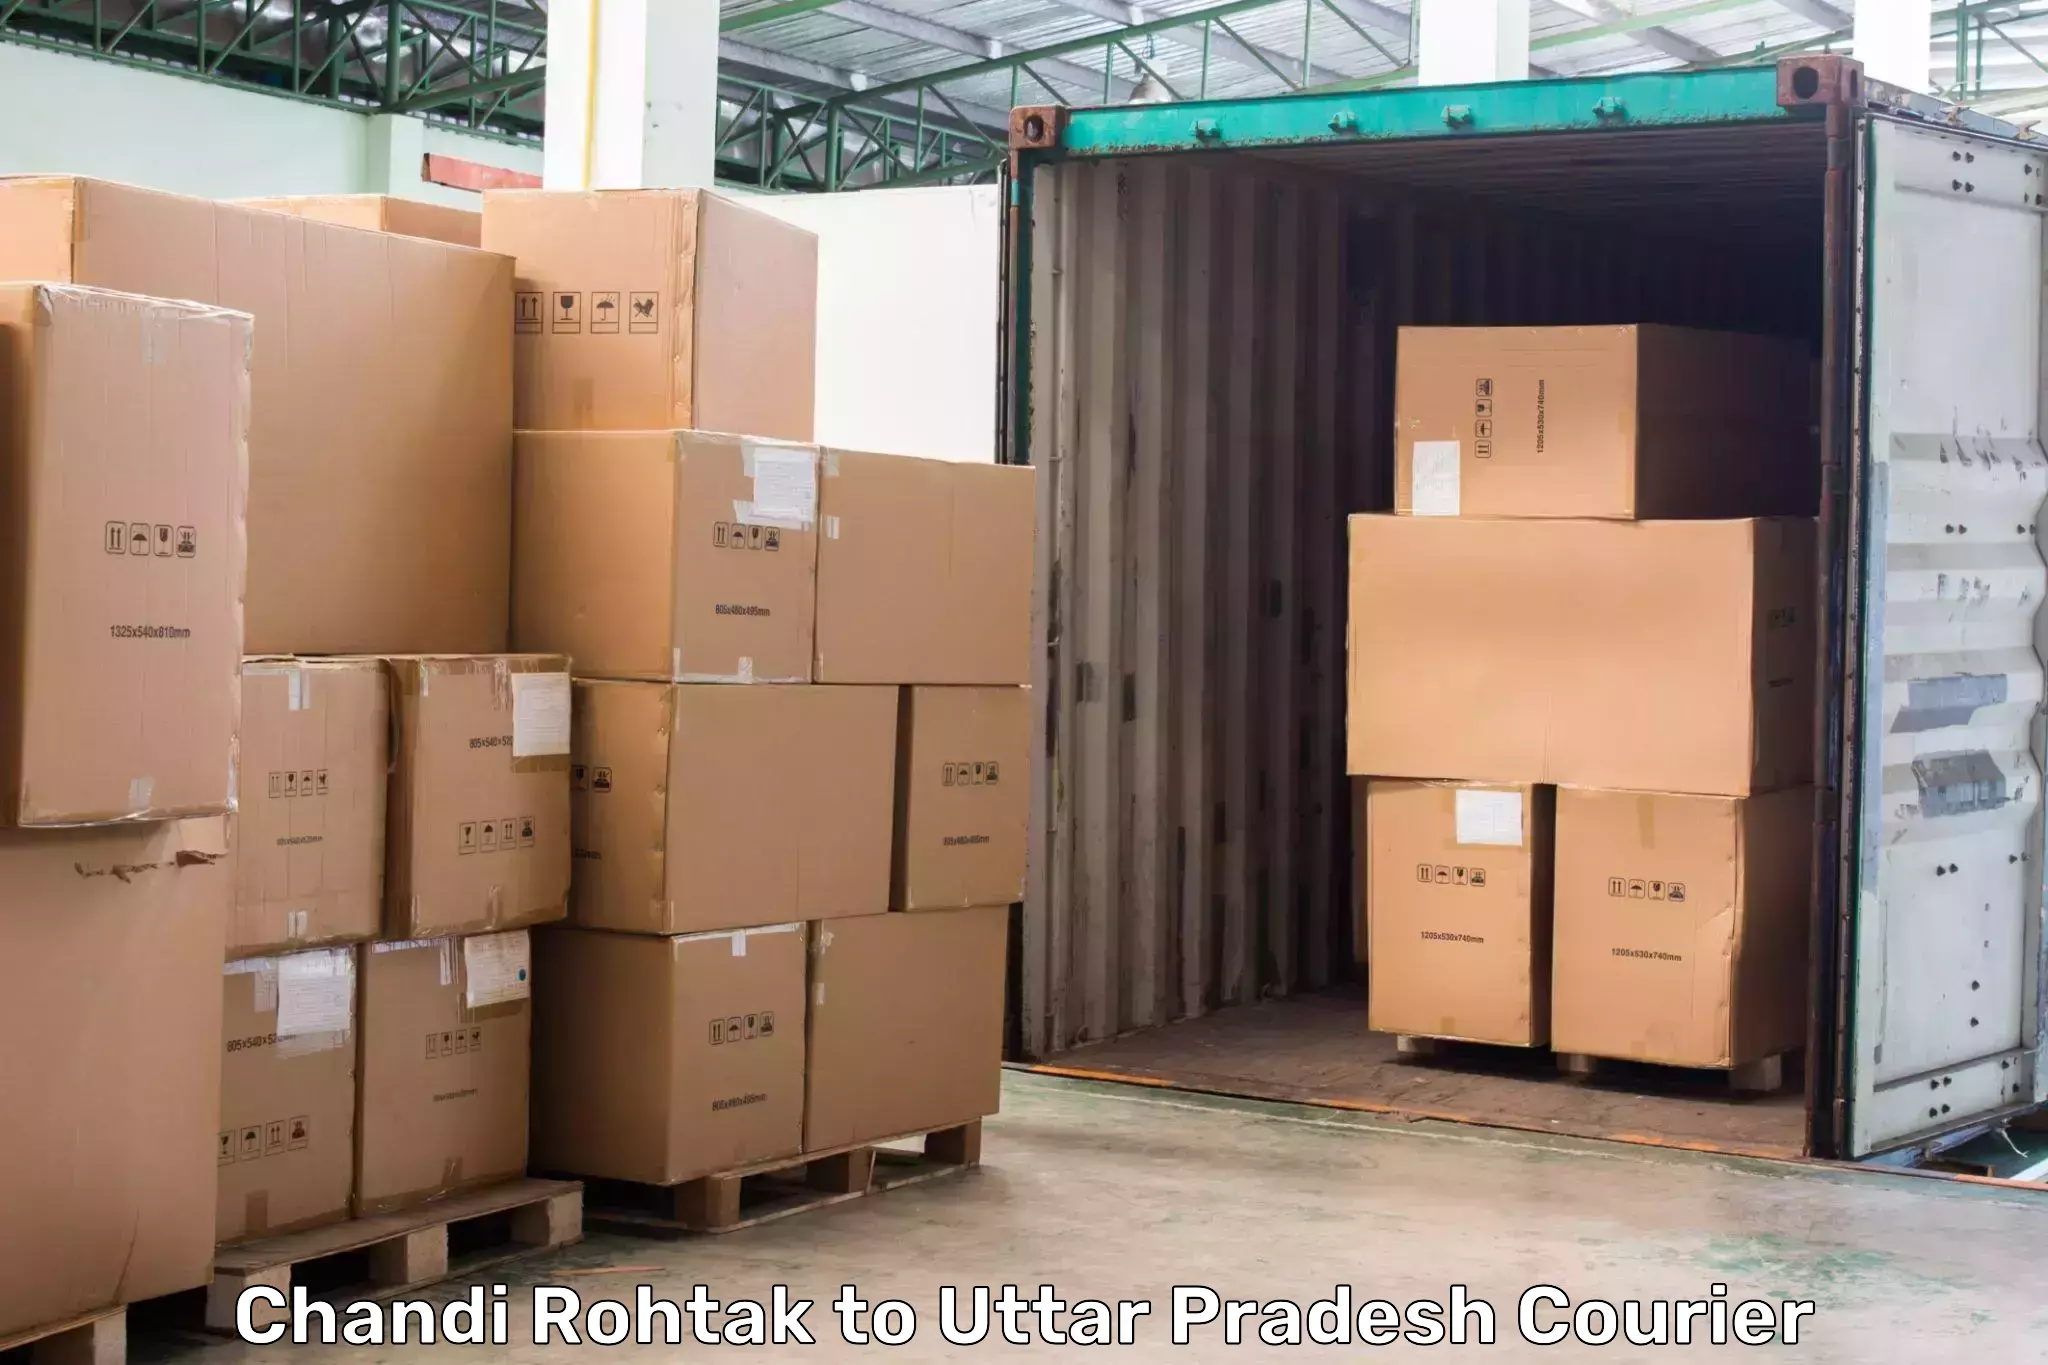 Flexible delivery schedules Chandi Rohtak to Mawana